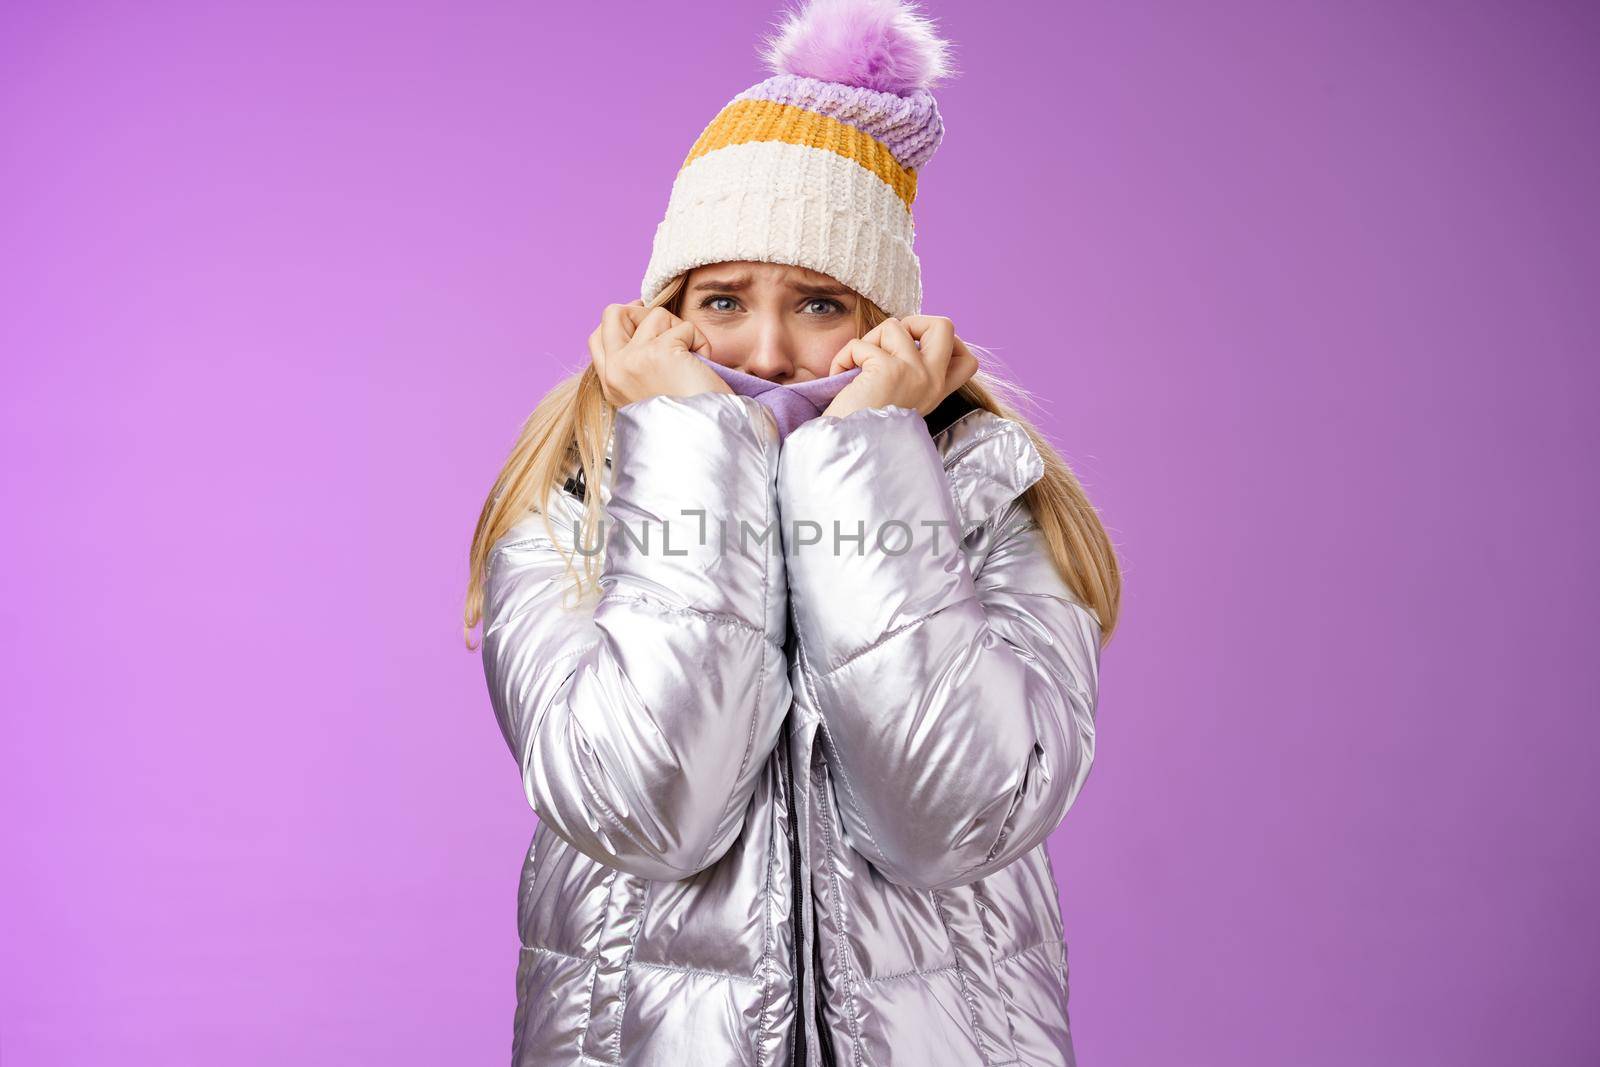 Scared afraid insecure coward girl in cute hat glittering shiny jacket pull cloth face frightened frowning stooping look concerned terrified scared death, standing purple background timid.